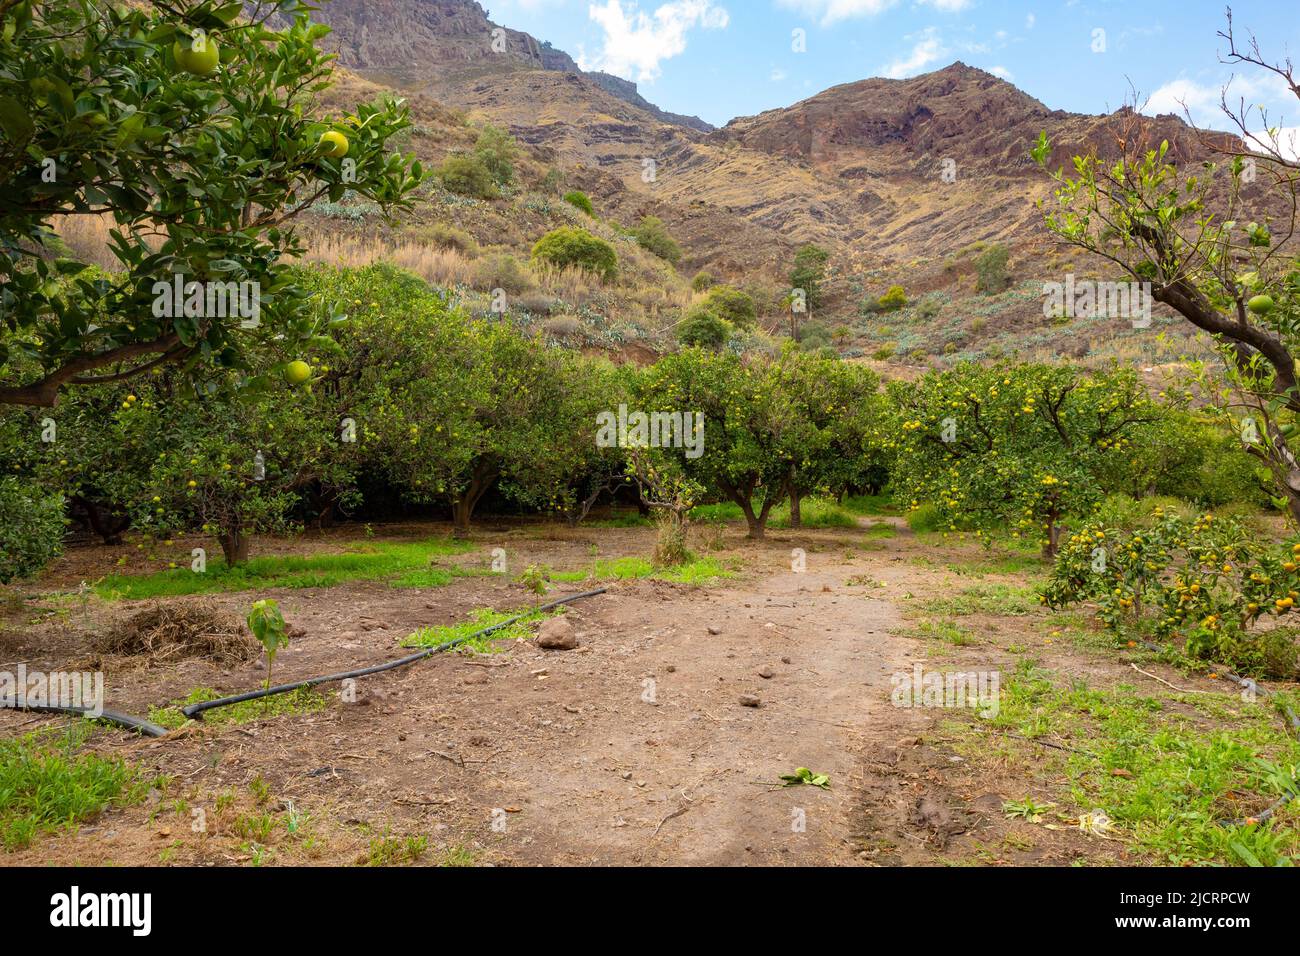 Empty Dirt Road Amidst Fruit Trees At Orchard Stock Photo